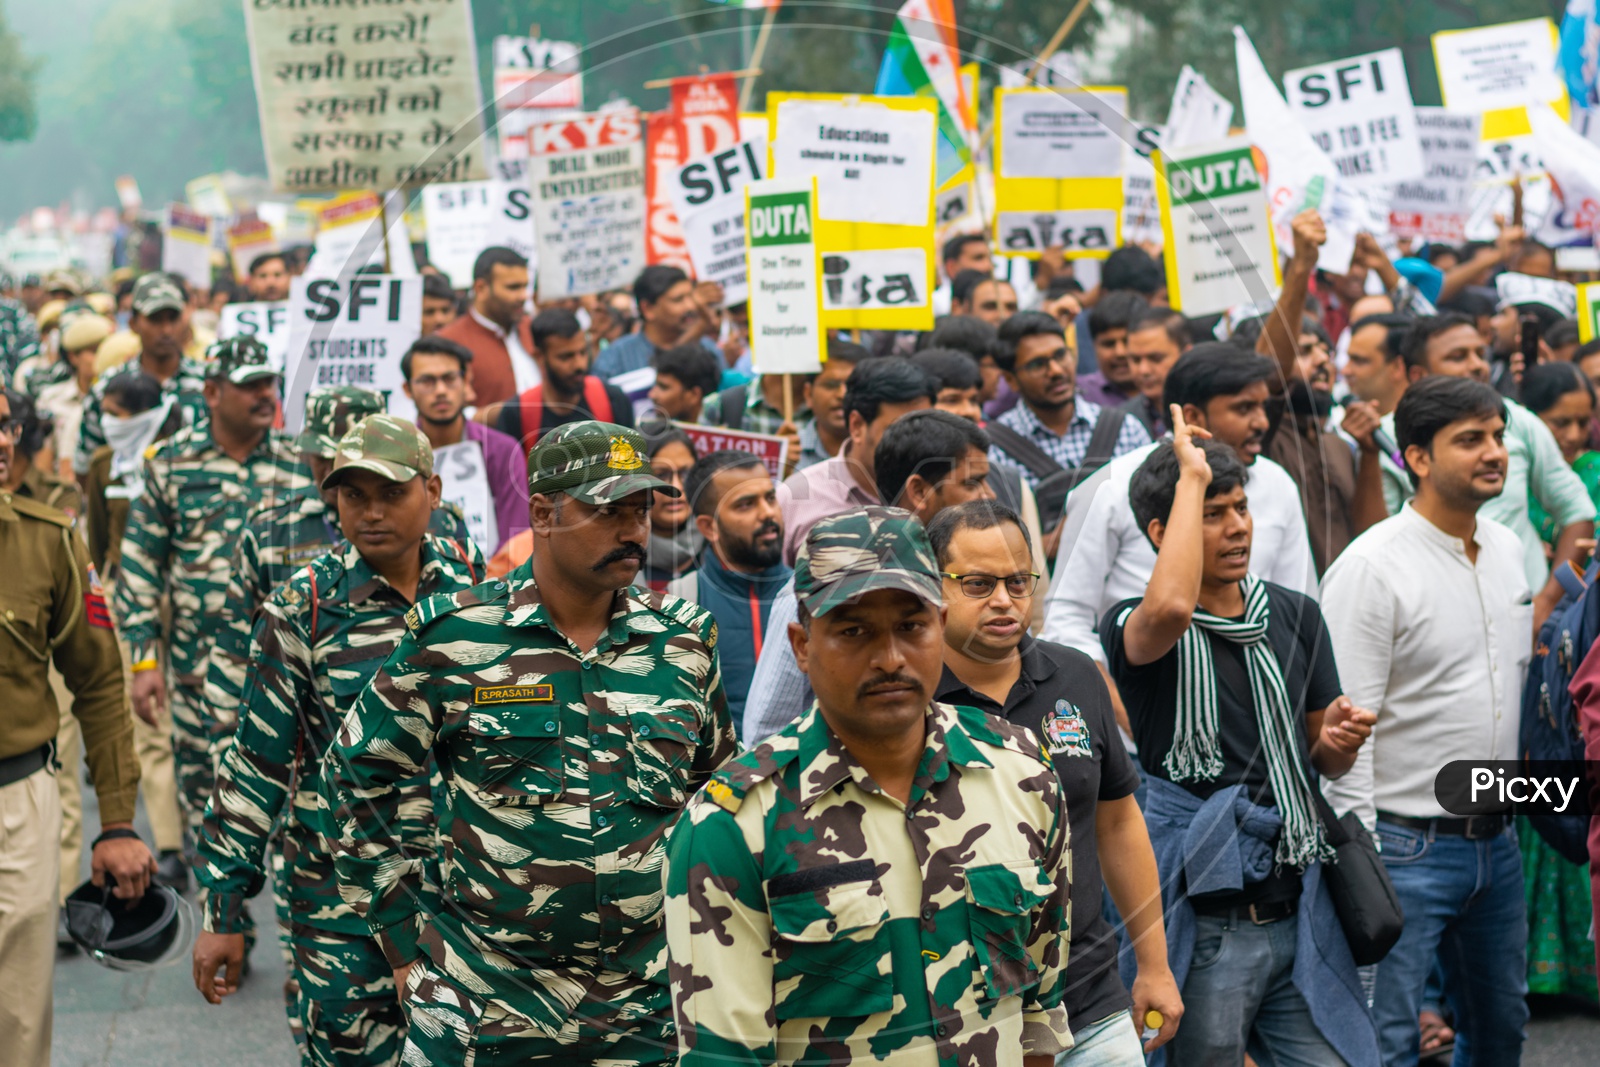 Delhi police and other security forces and Students and teachers from different universities and different organisations demanding withdrawal of 'National Education Policy 2019' and protesting against other issues related to Education